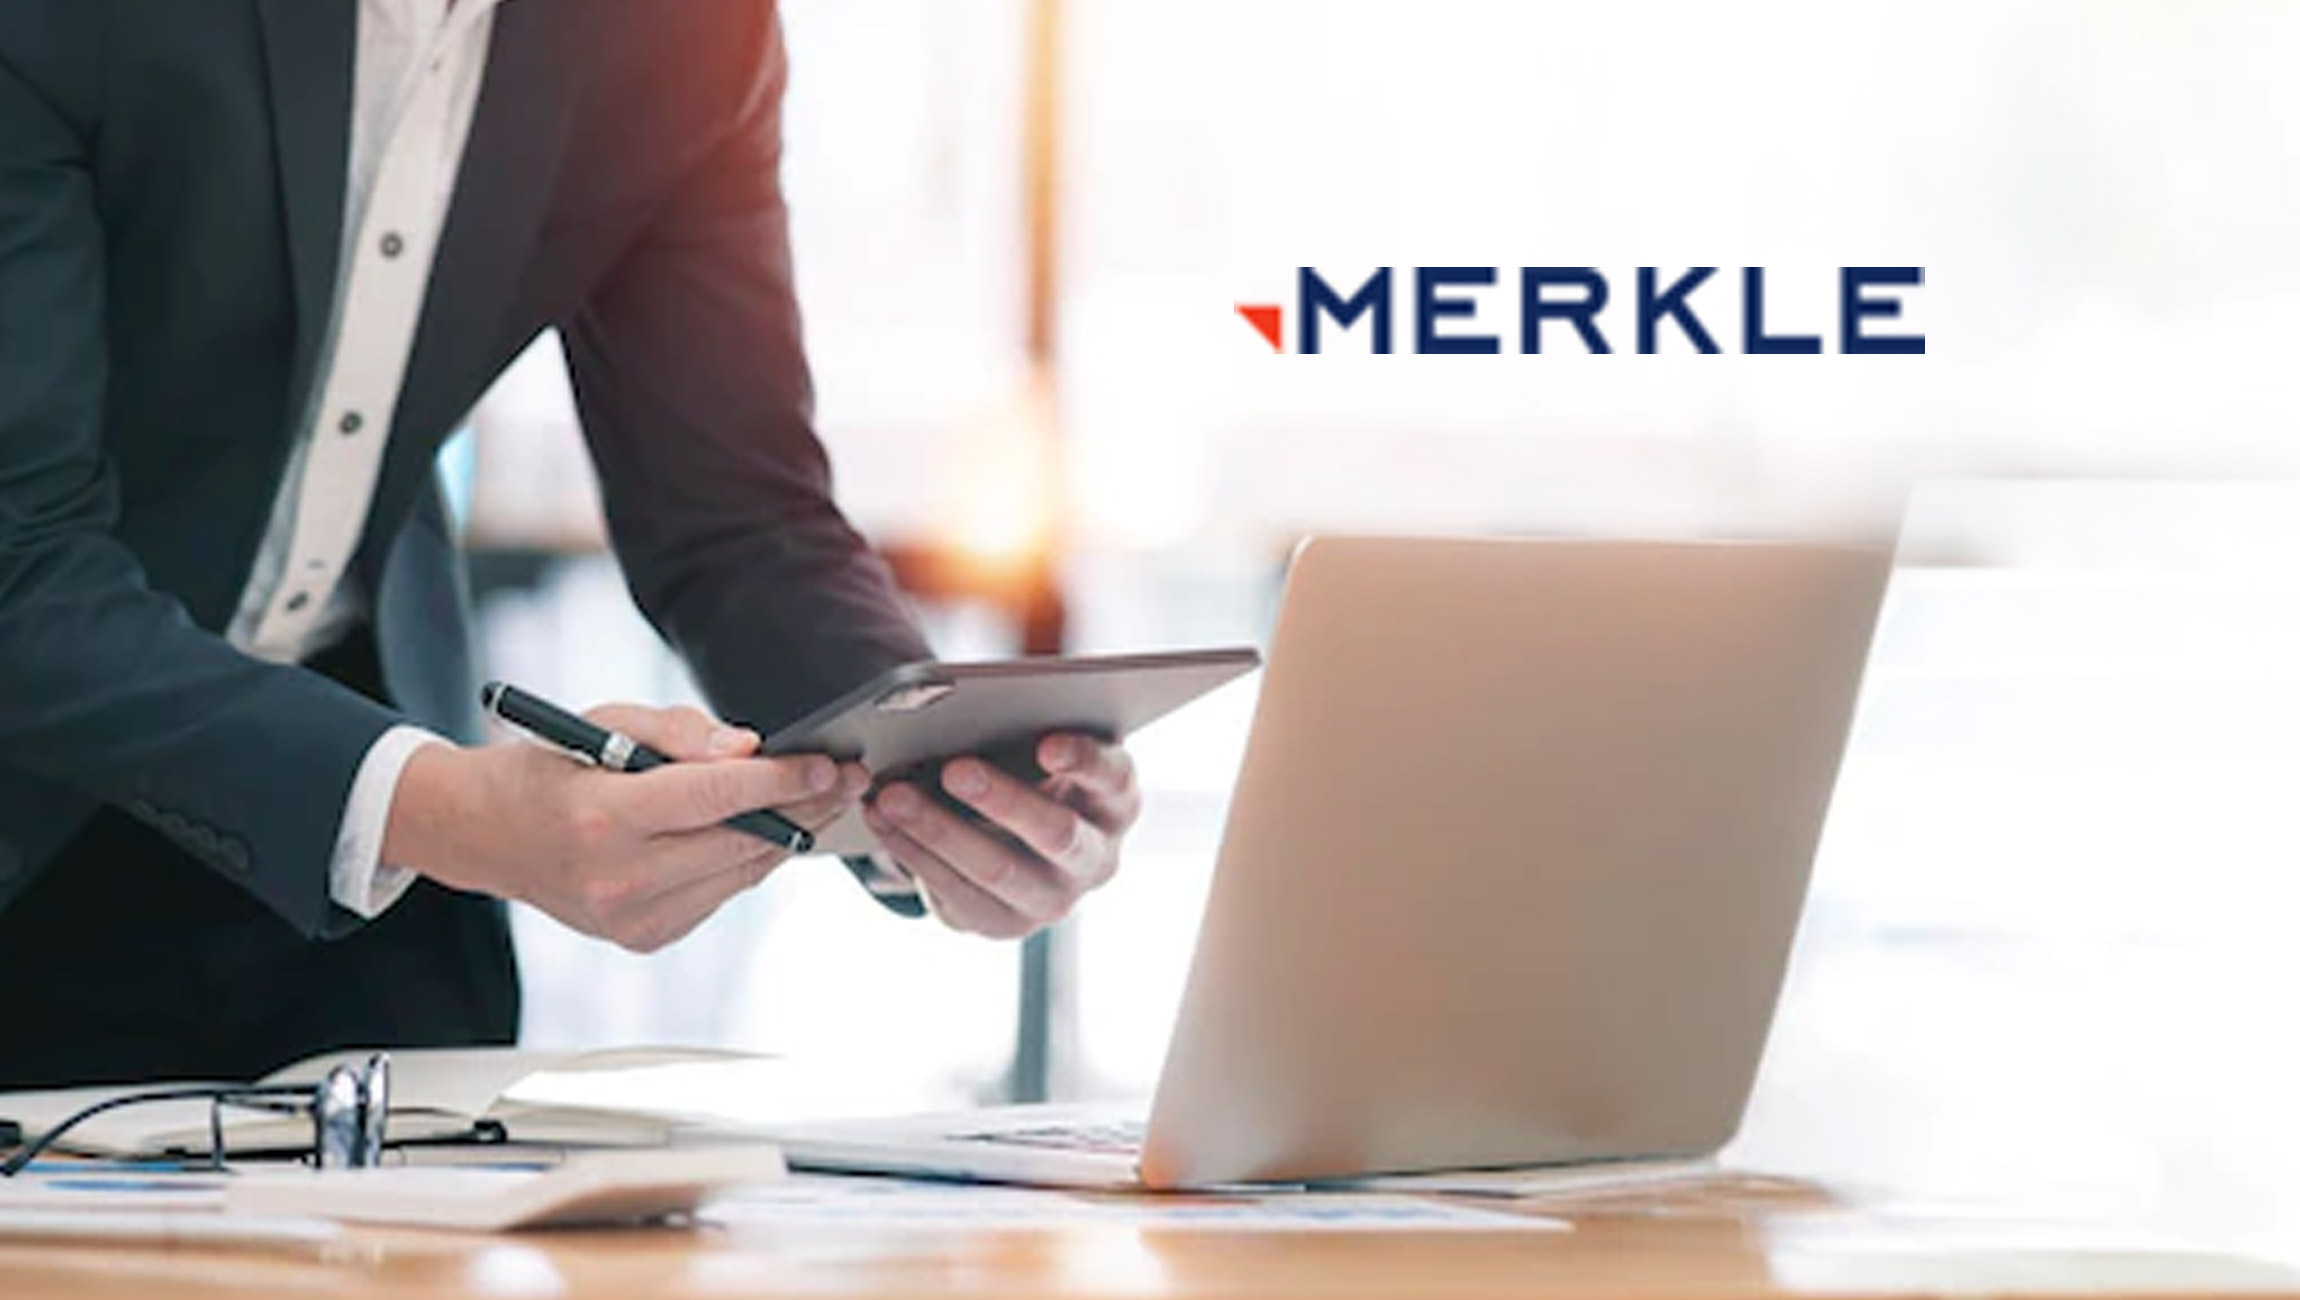 Merkle Response Management Group (RMG) Launches Sustainable Business Plan to Remain Ready and Resilient Post-COVID 4